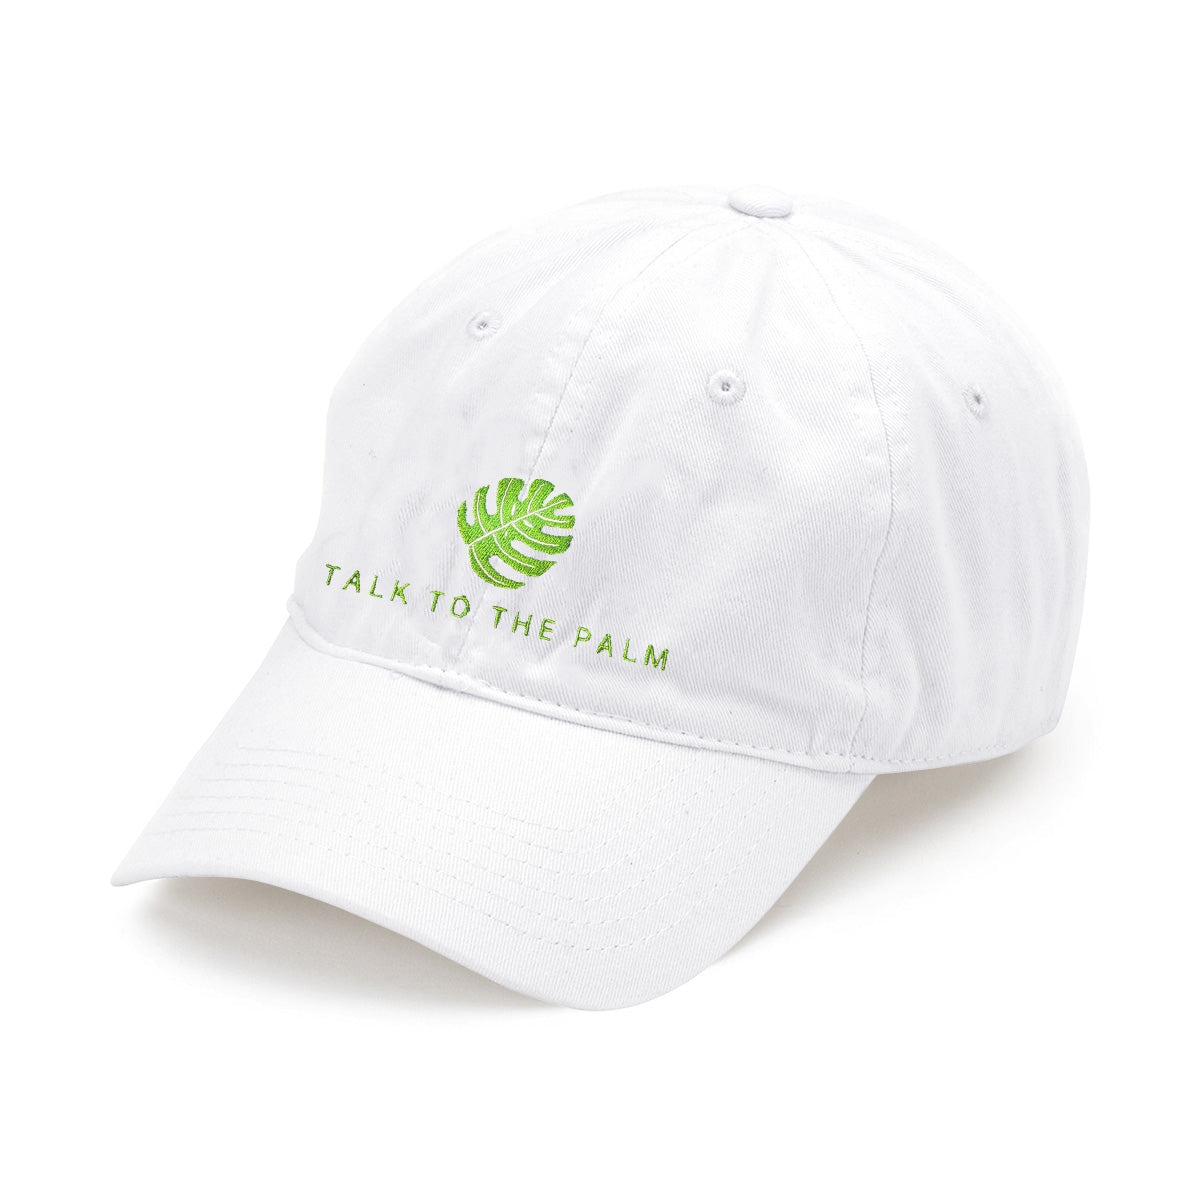 Talk to the Palm Embroidered White Cap